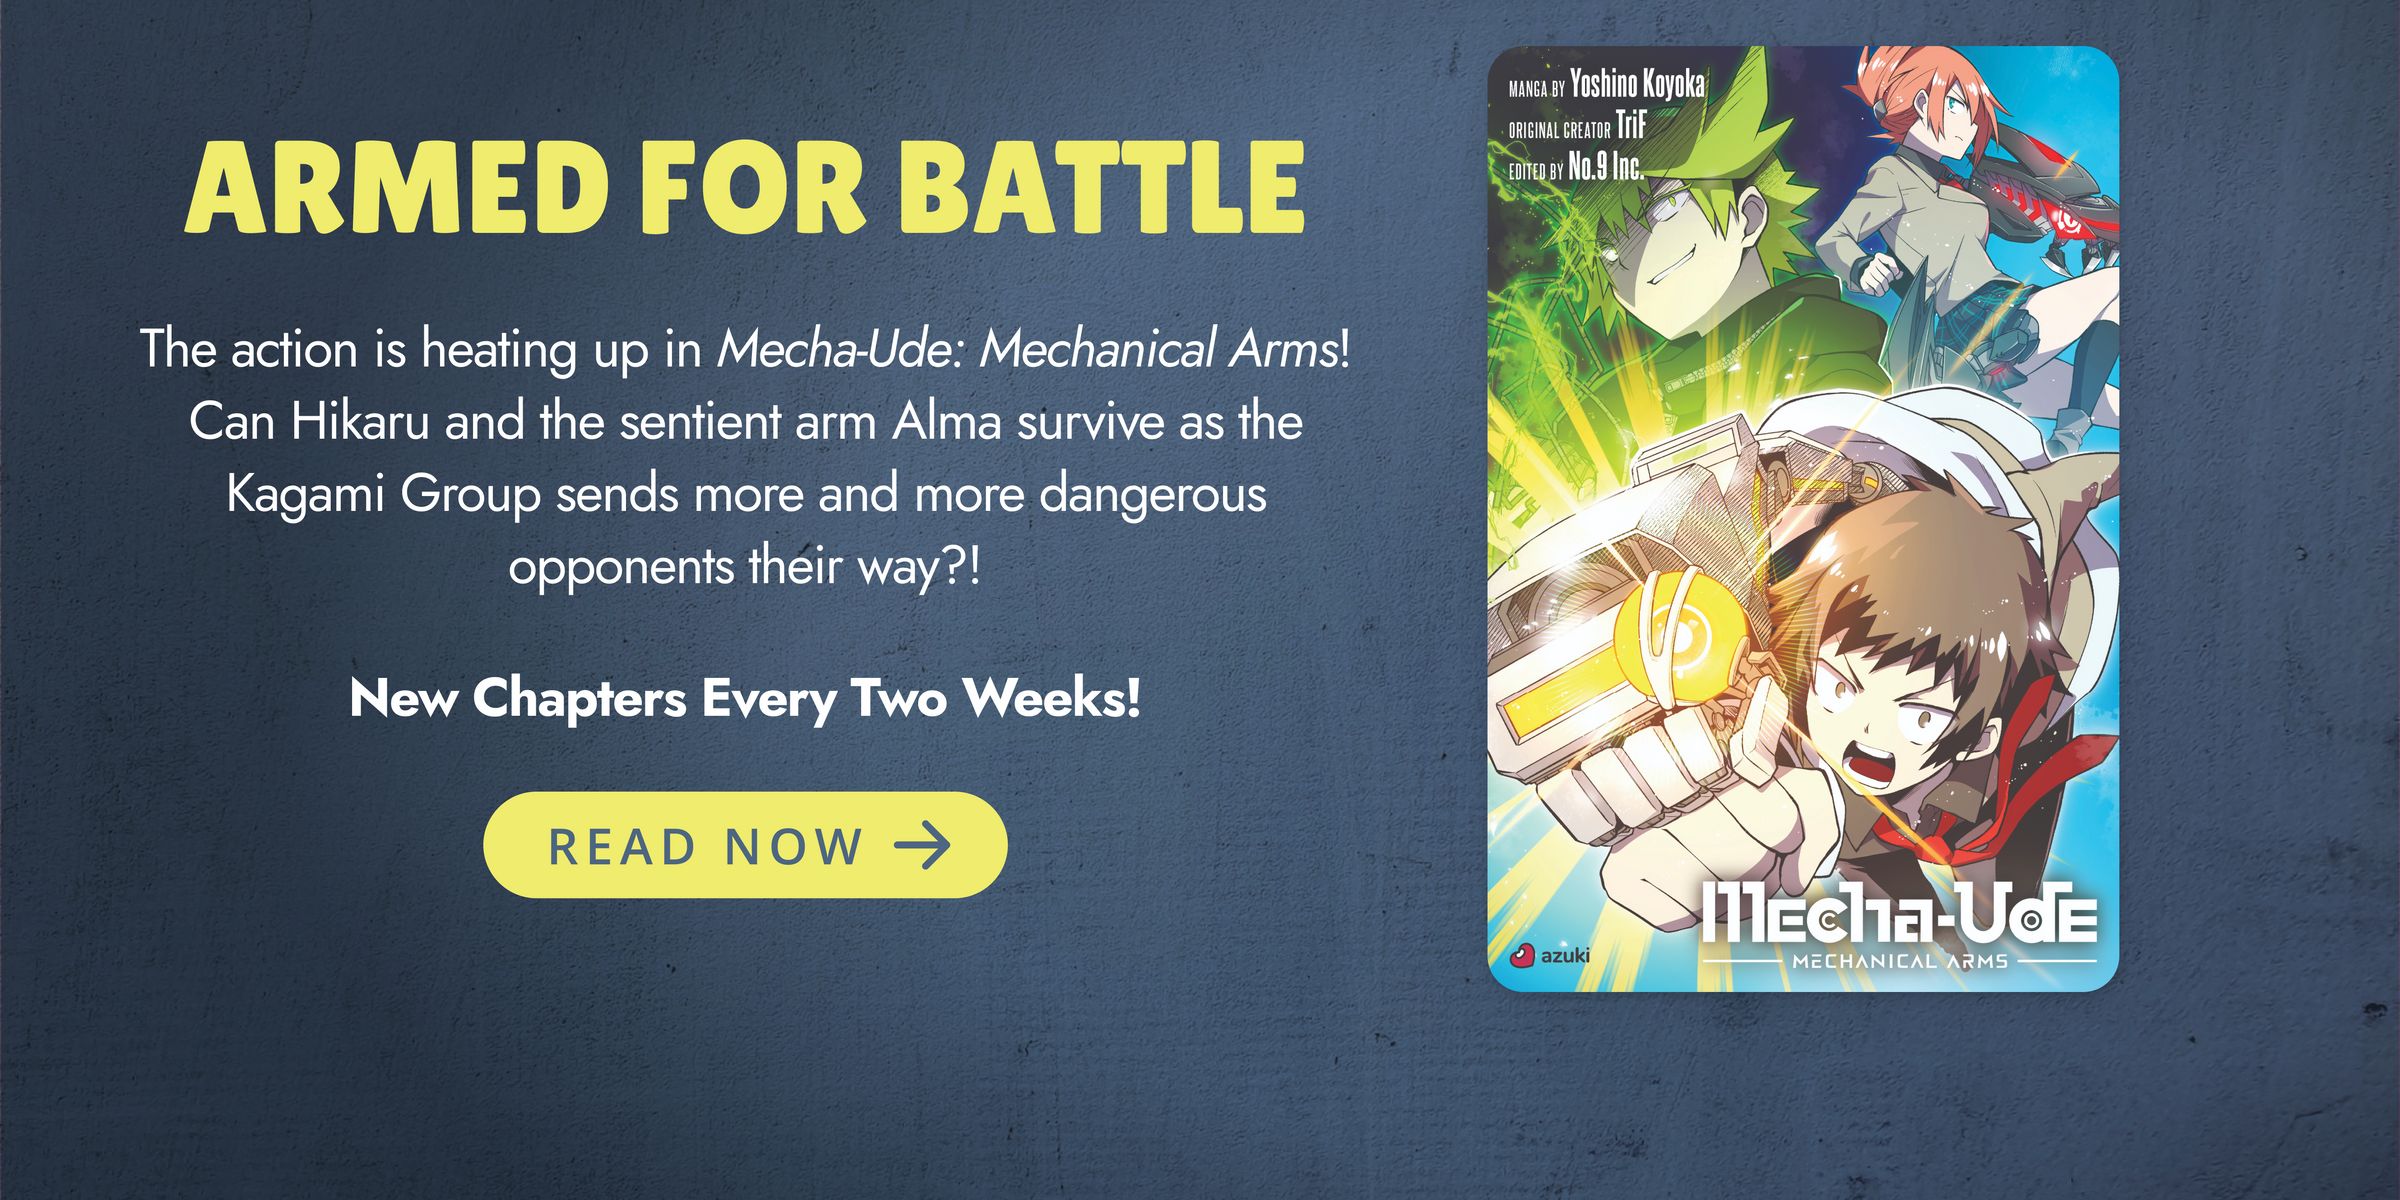 ARMED FOR BATTLE. The action is heating up in Mecha-Ude: Mechanical Arms! Can Hikaru and the sentient arm Alma survive as the Kagami Group sends more and more dangerous opponents their way?! New Chapters Every Two Weeks! READ NOW.